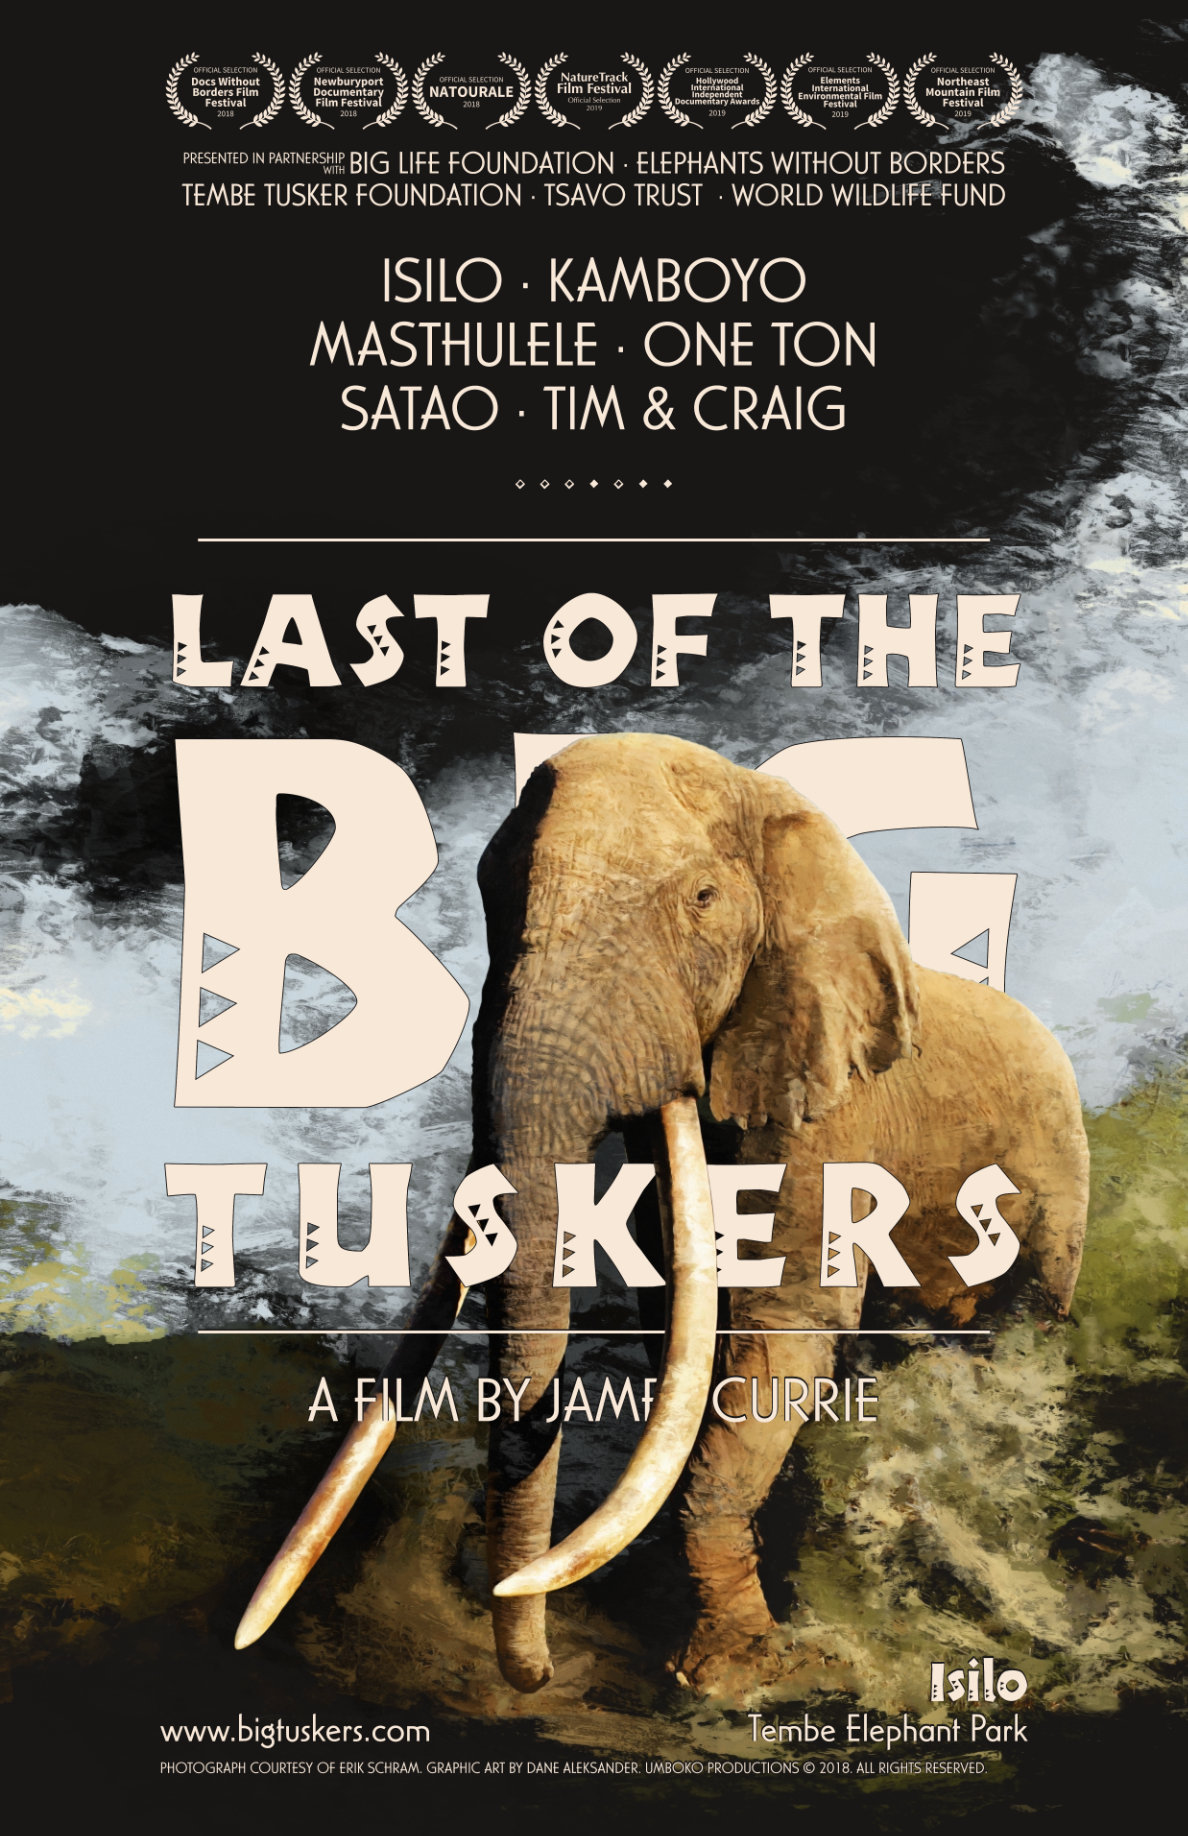 Last of the Big Tuskers – Festival poster (2018) © Umboko Productions